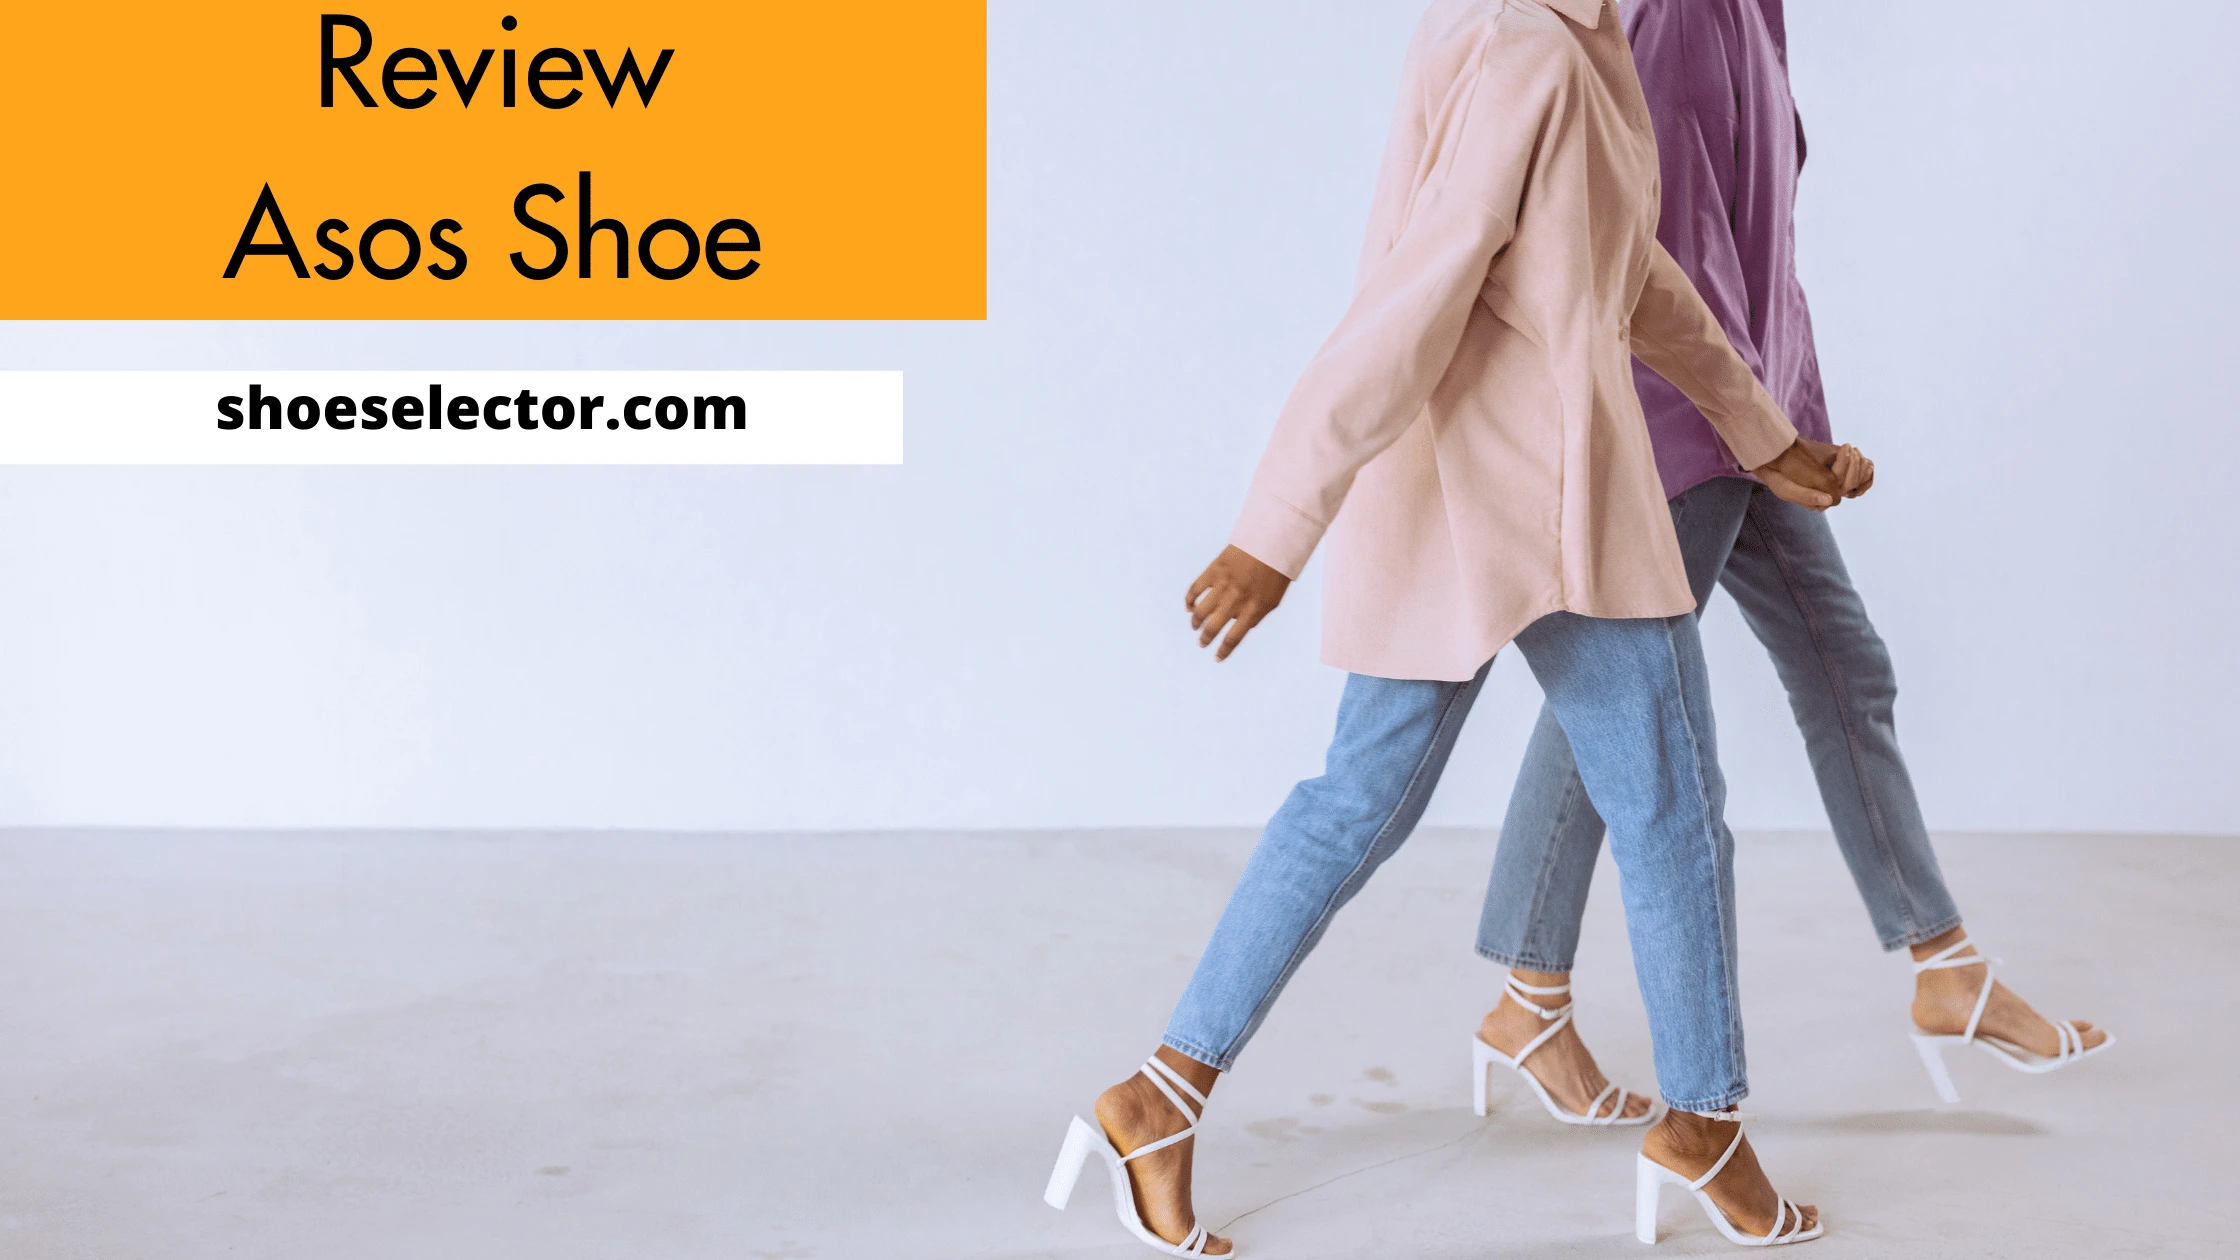 Asos Shoe Review With Complete Shopping Tips